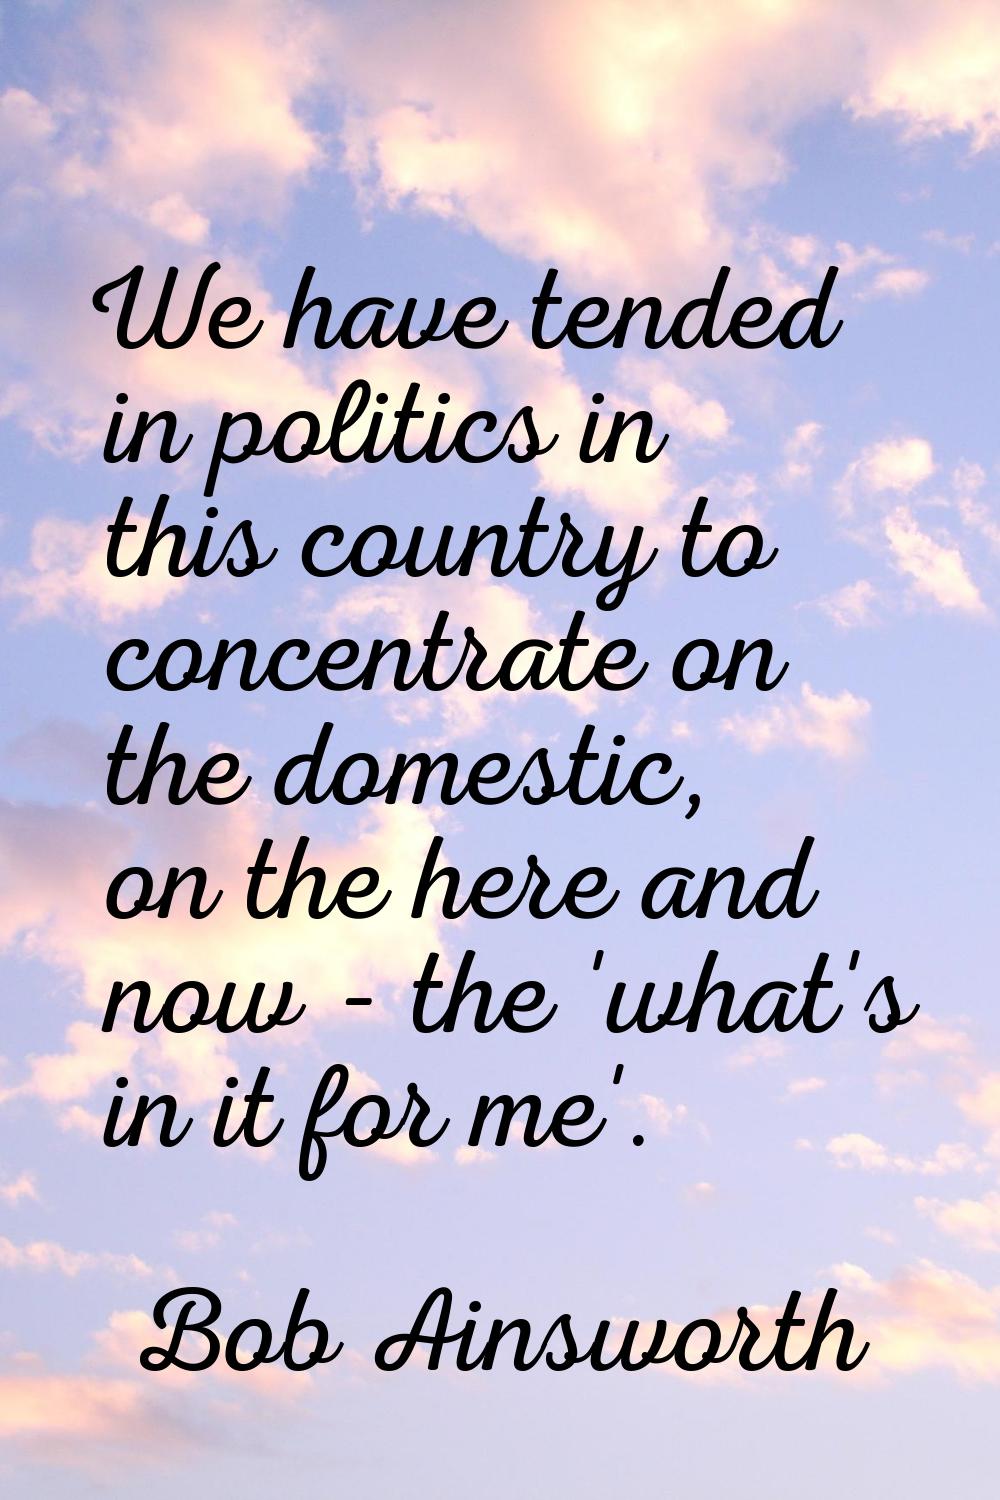 We have tended in politics in this country to concentrate on the domestic, on the here and now - th